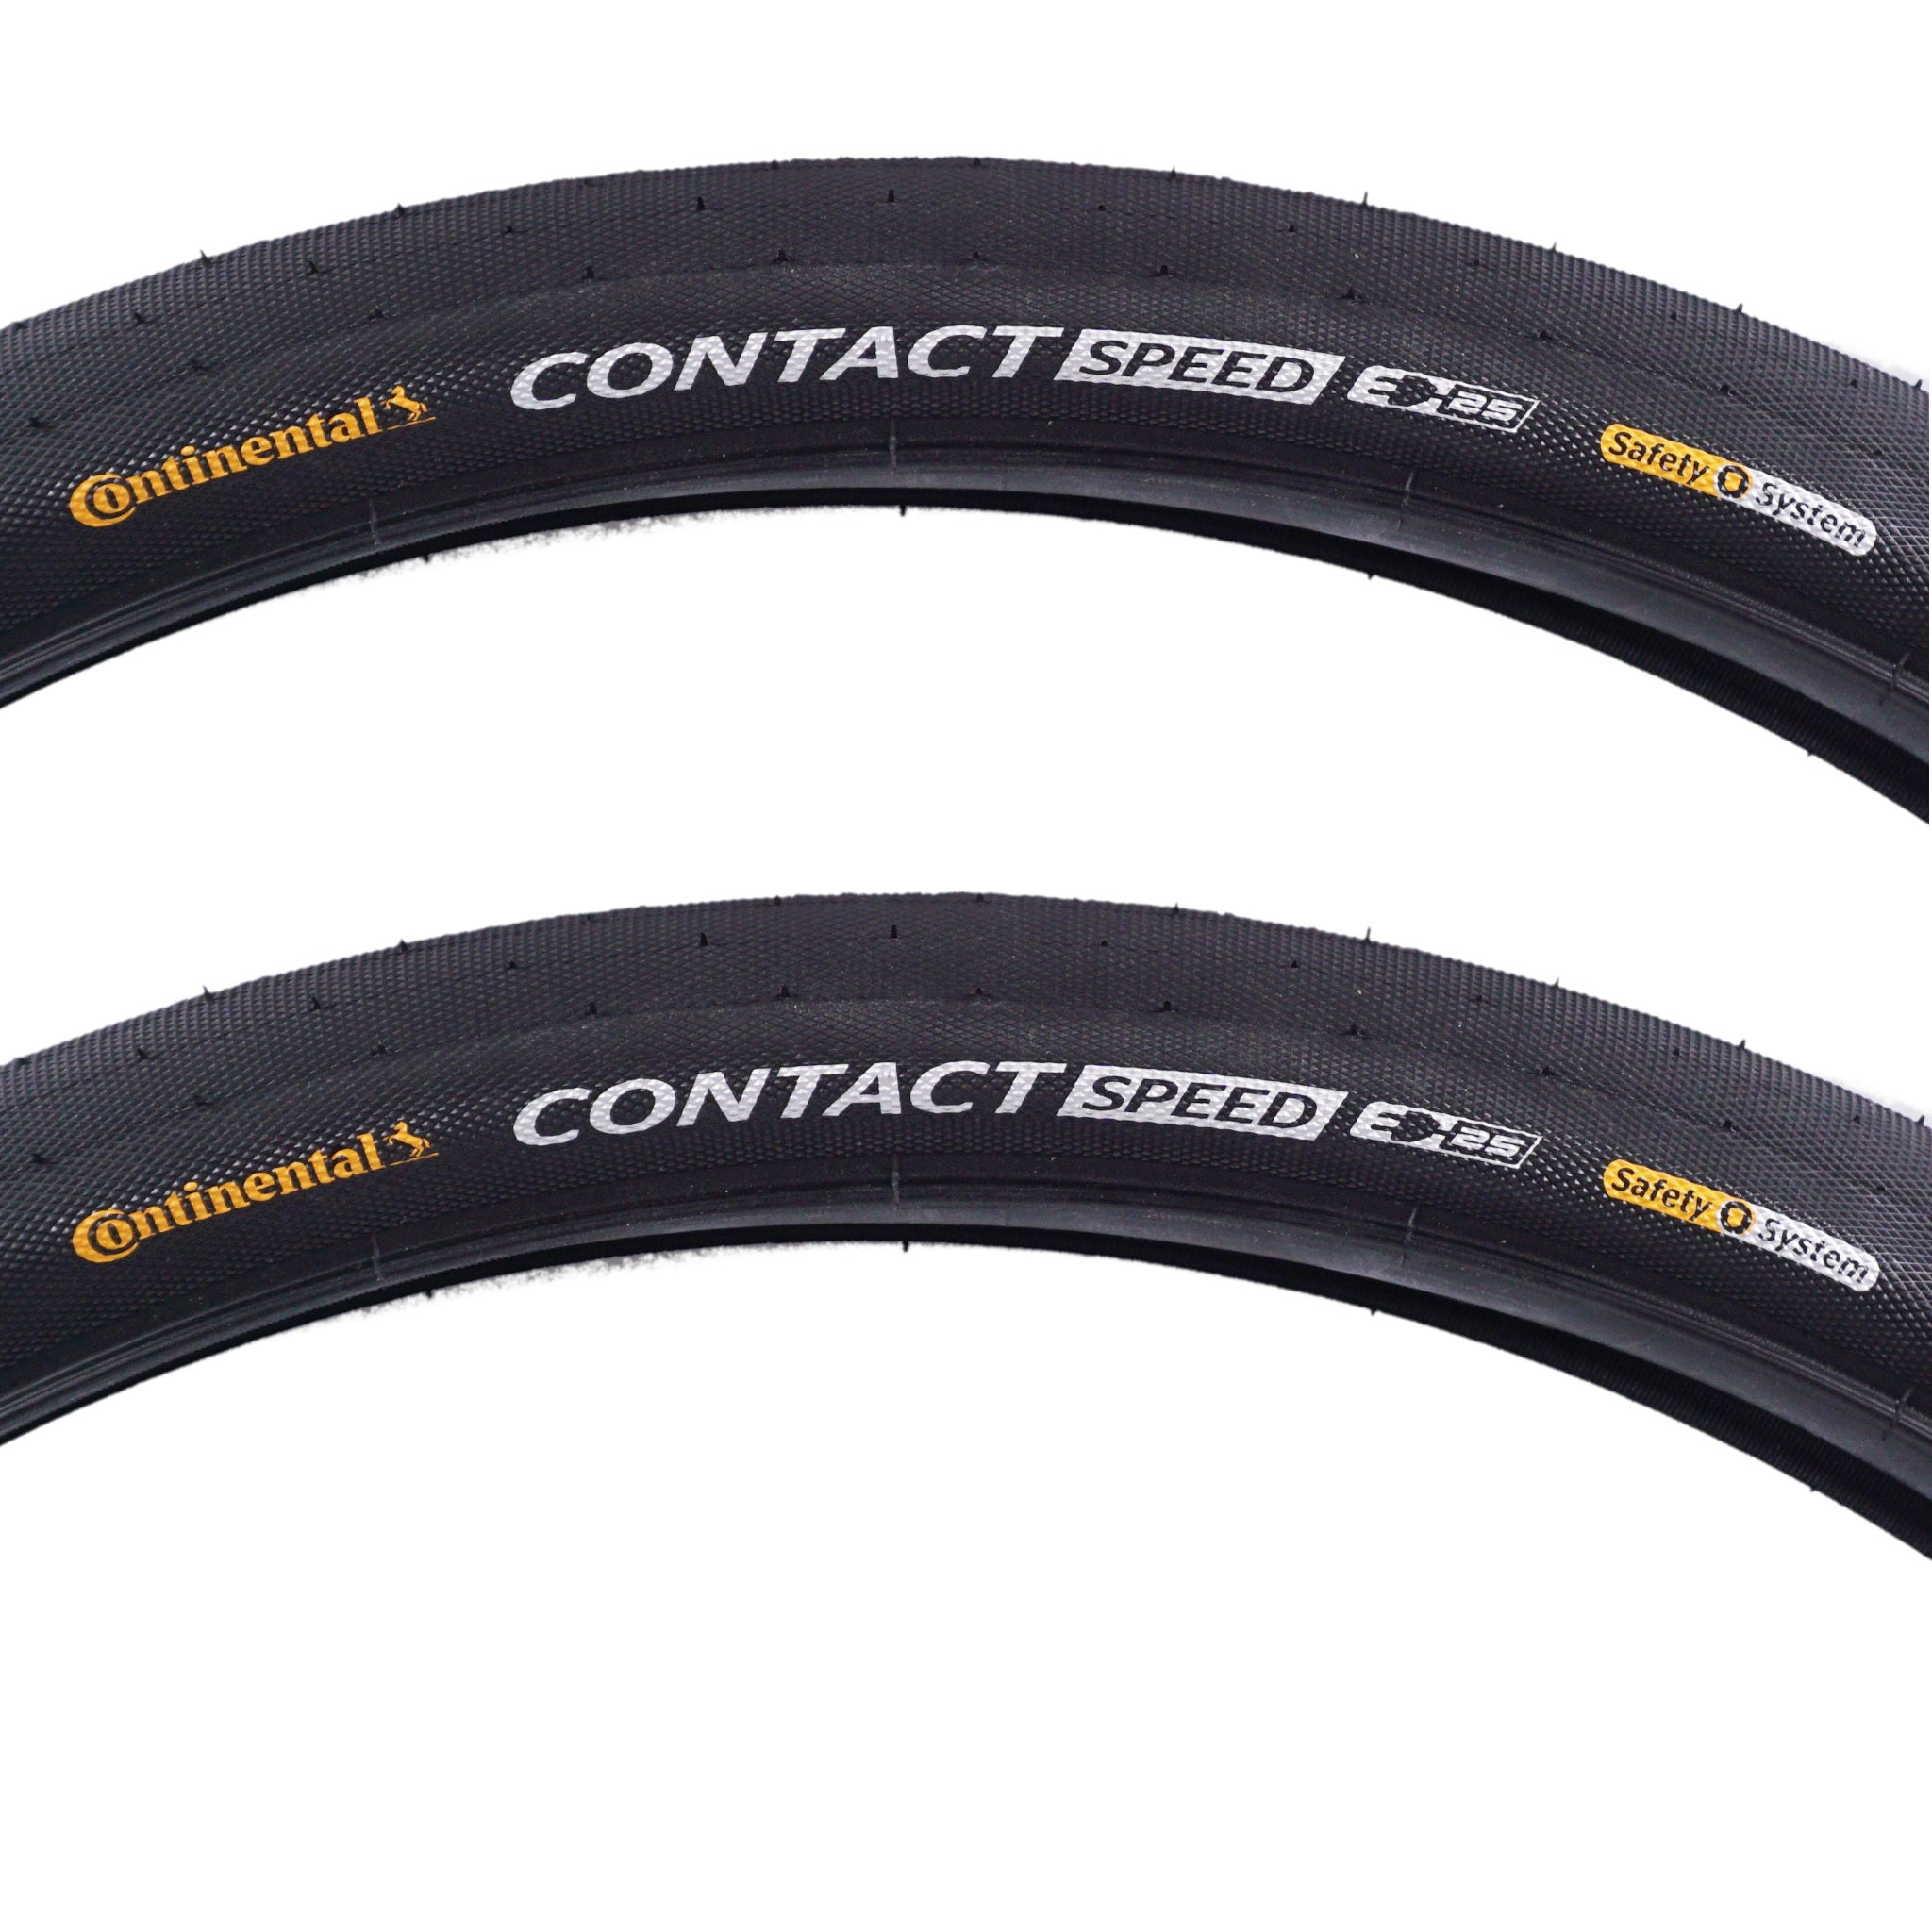 Continental Contact Speed 27.5-inch (650b) E25 ebike Tire - The Bikesmiths